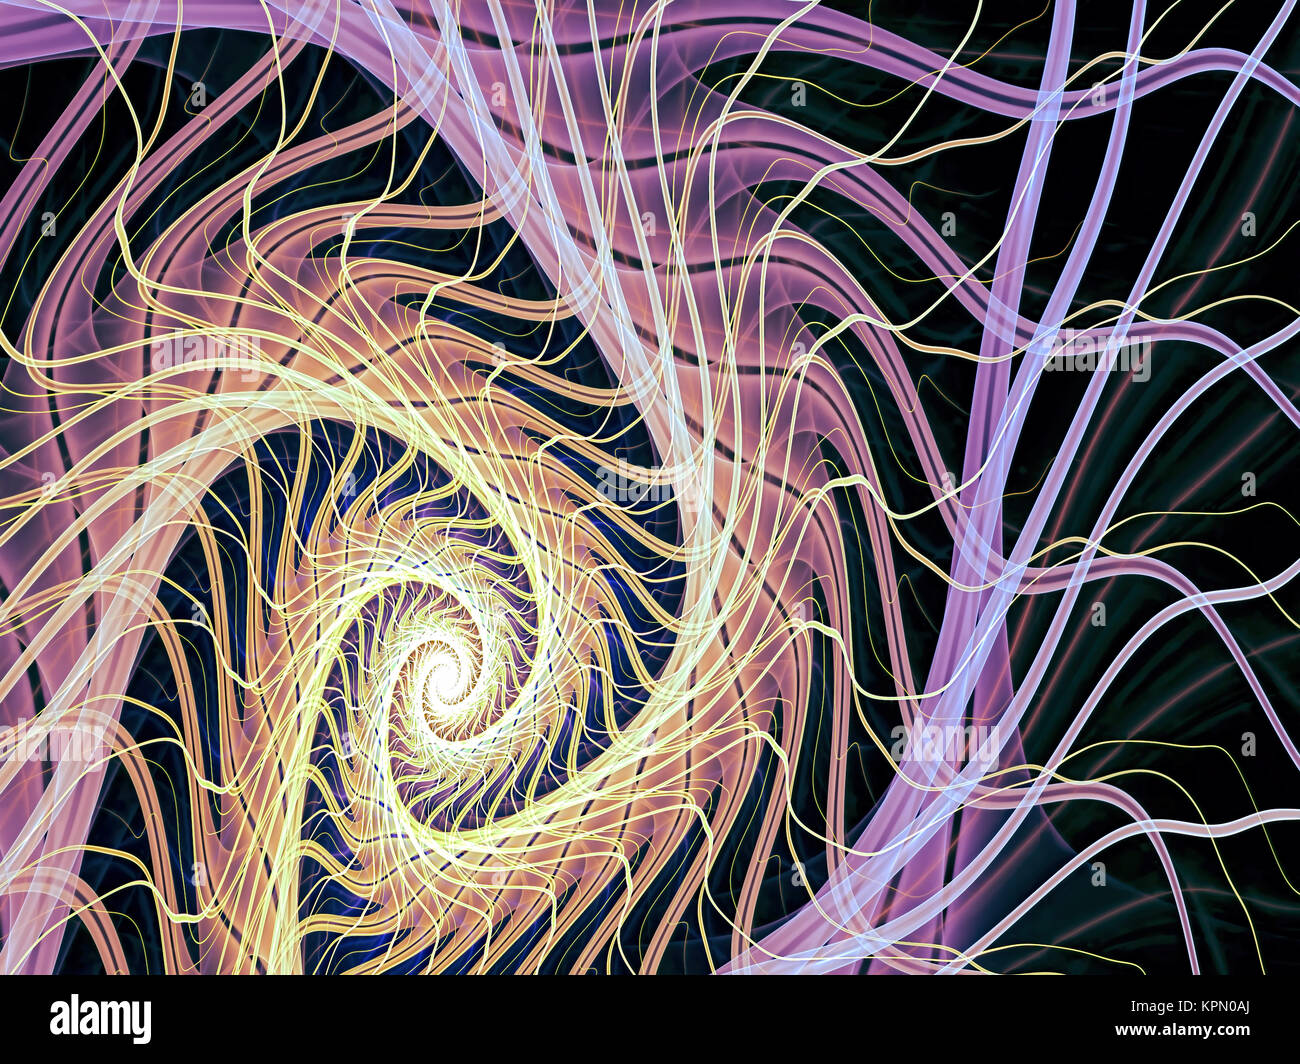 Abstract digitally generated image mystic spiral Stock Photo